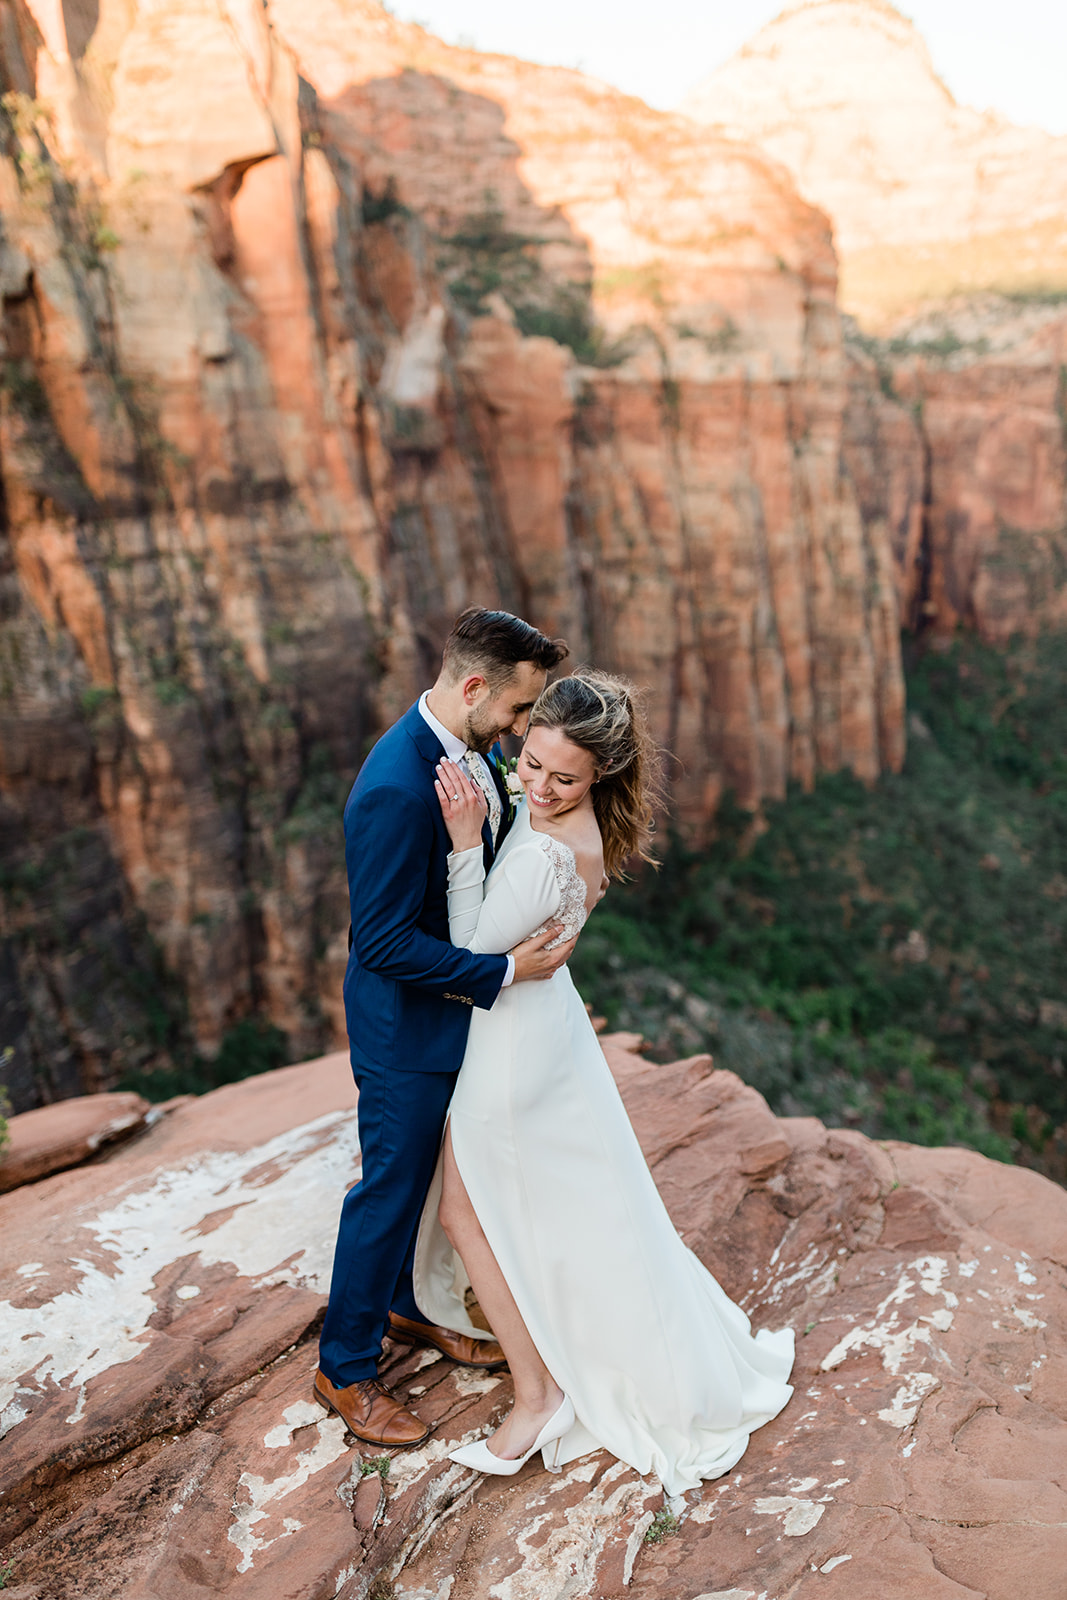 Nick and Kate snuggle in front of a dramatic overlook before their Zion elopement